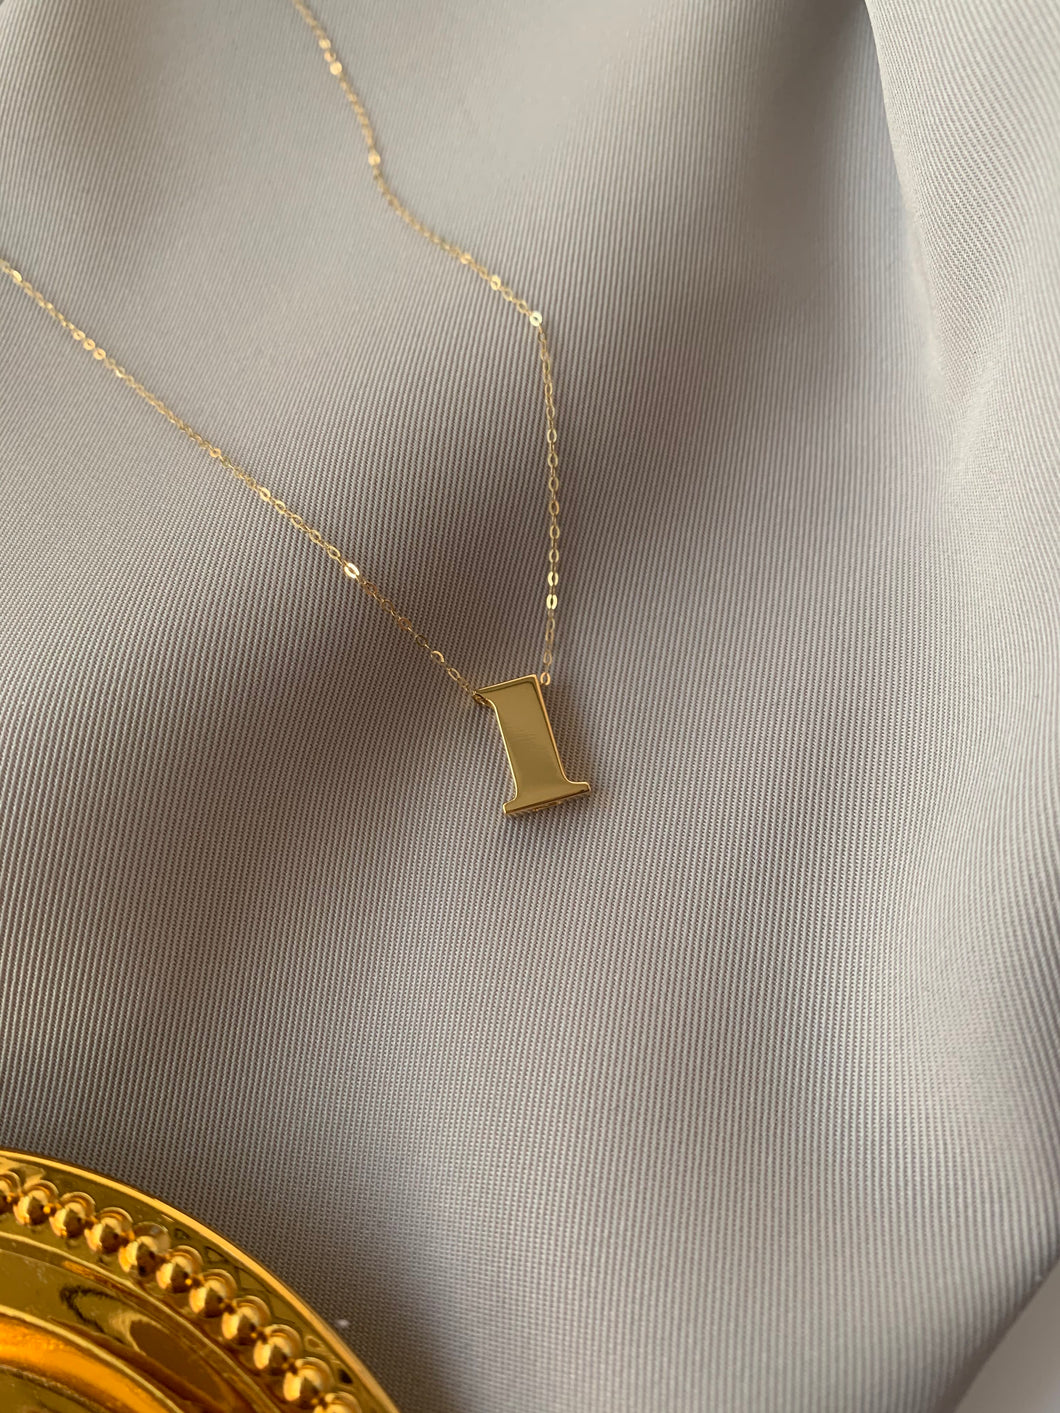 #1 gold pendant and a gold tauco chain.